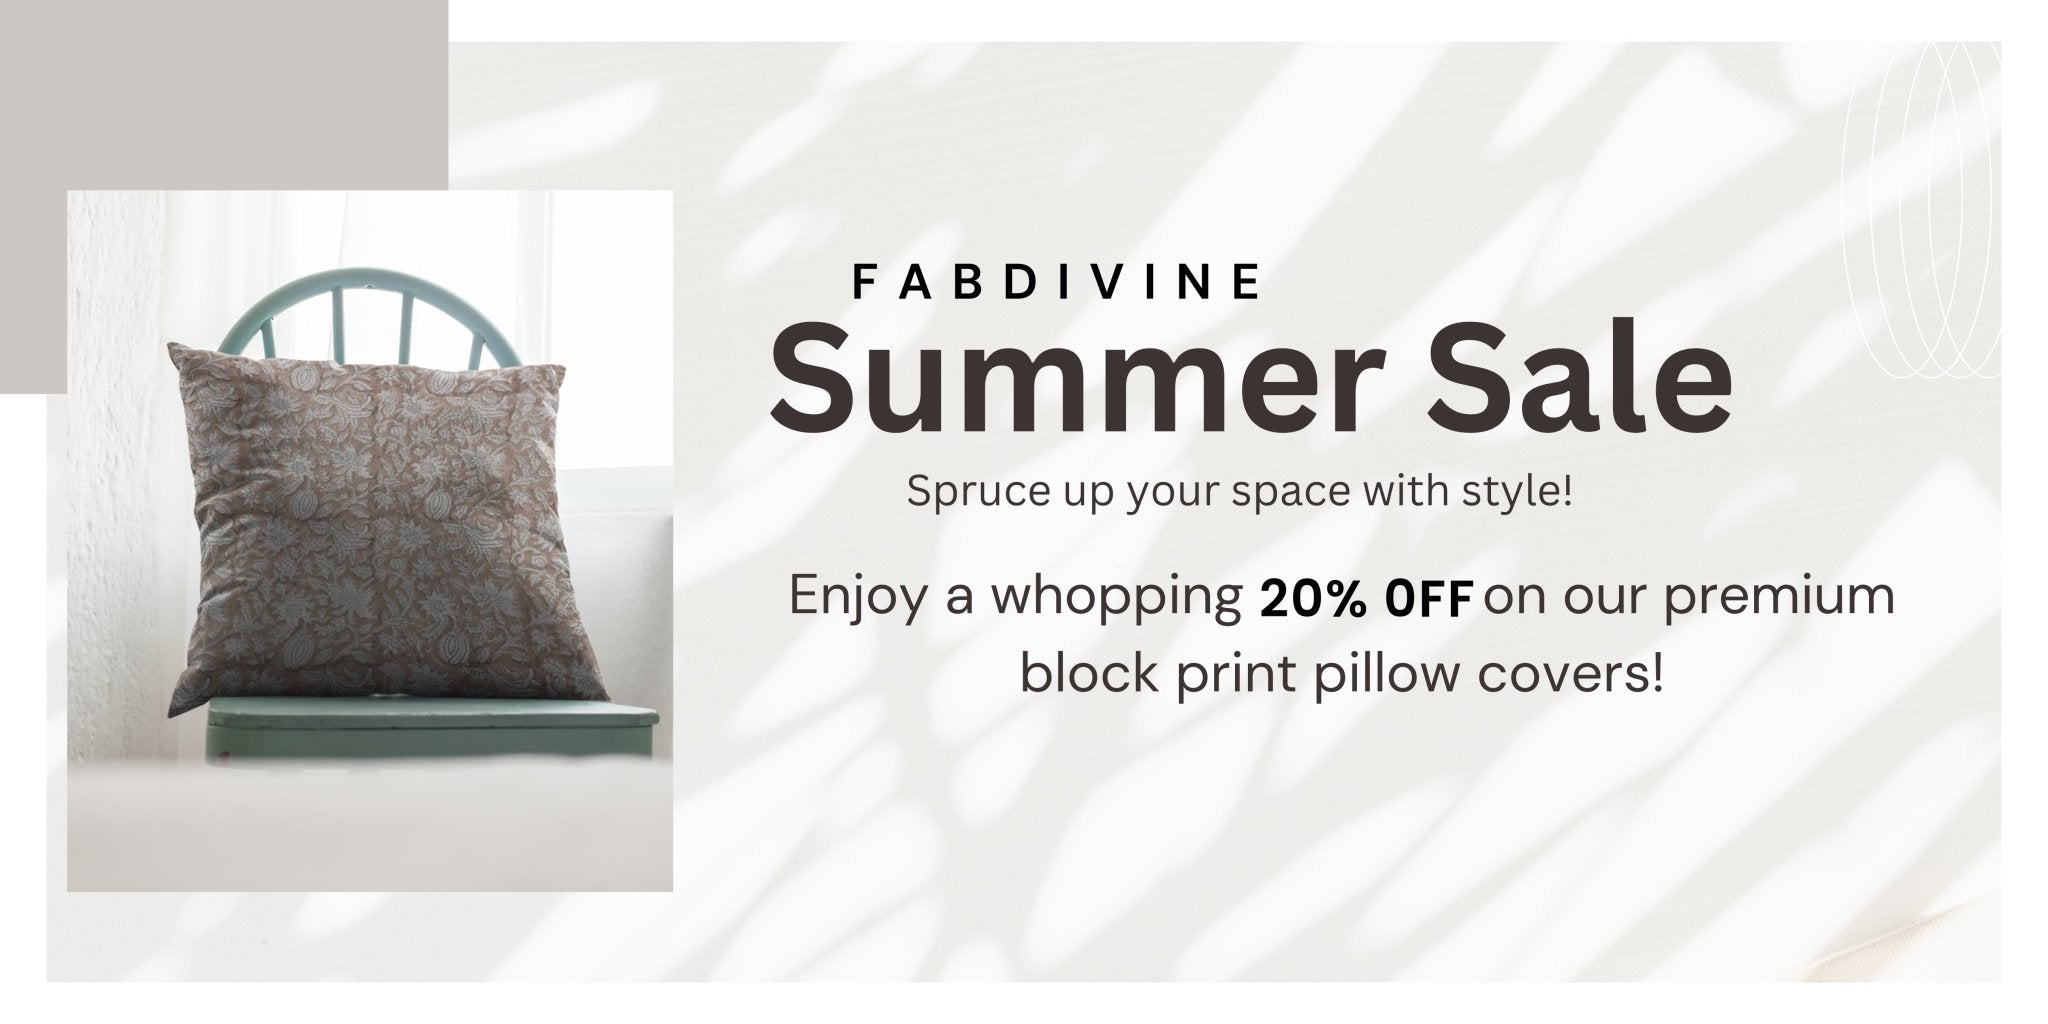 Discover Stunning Block Print Pillow Covers on Fabdivine's Summer Sale - FABDIVINE LLC